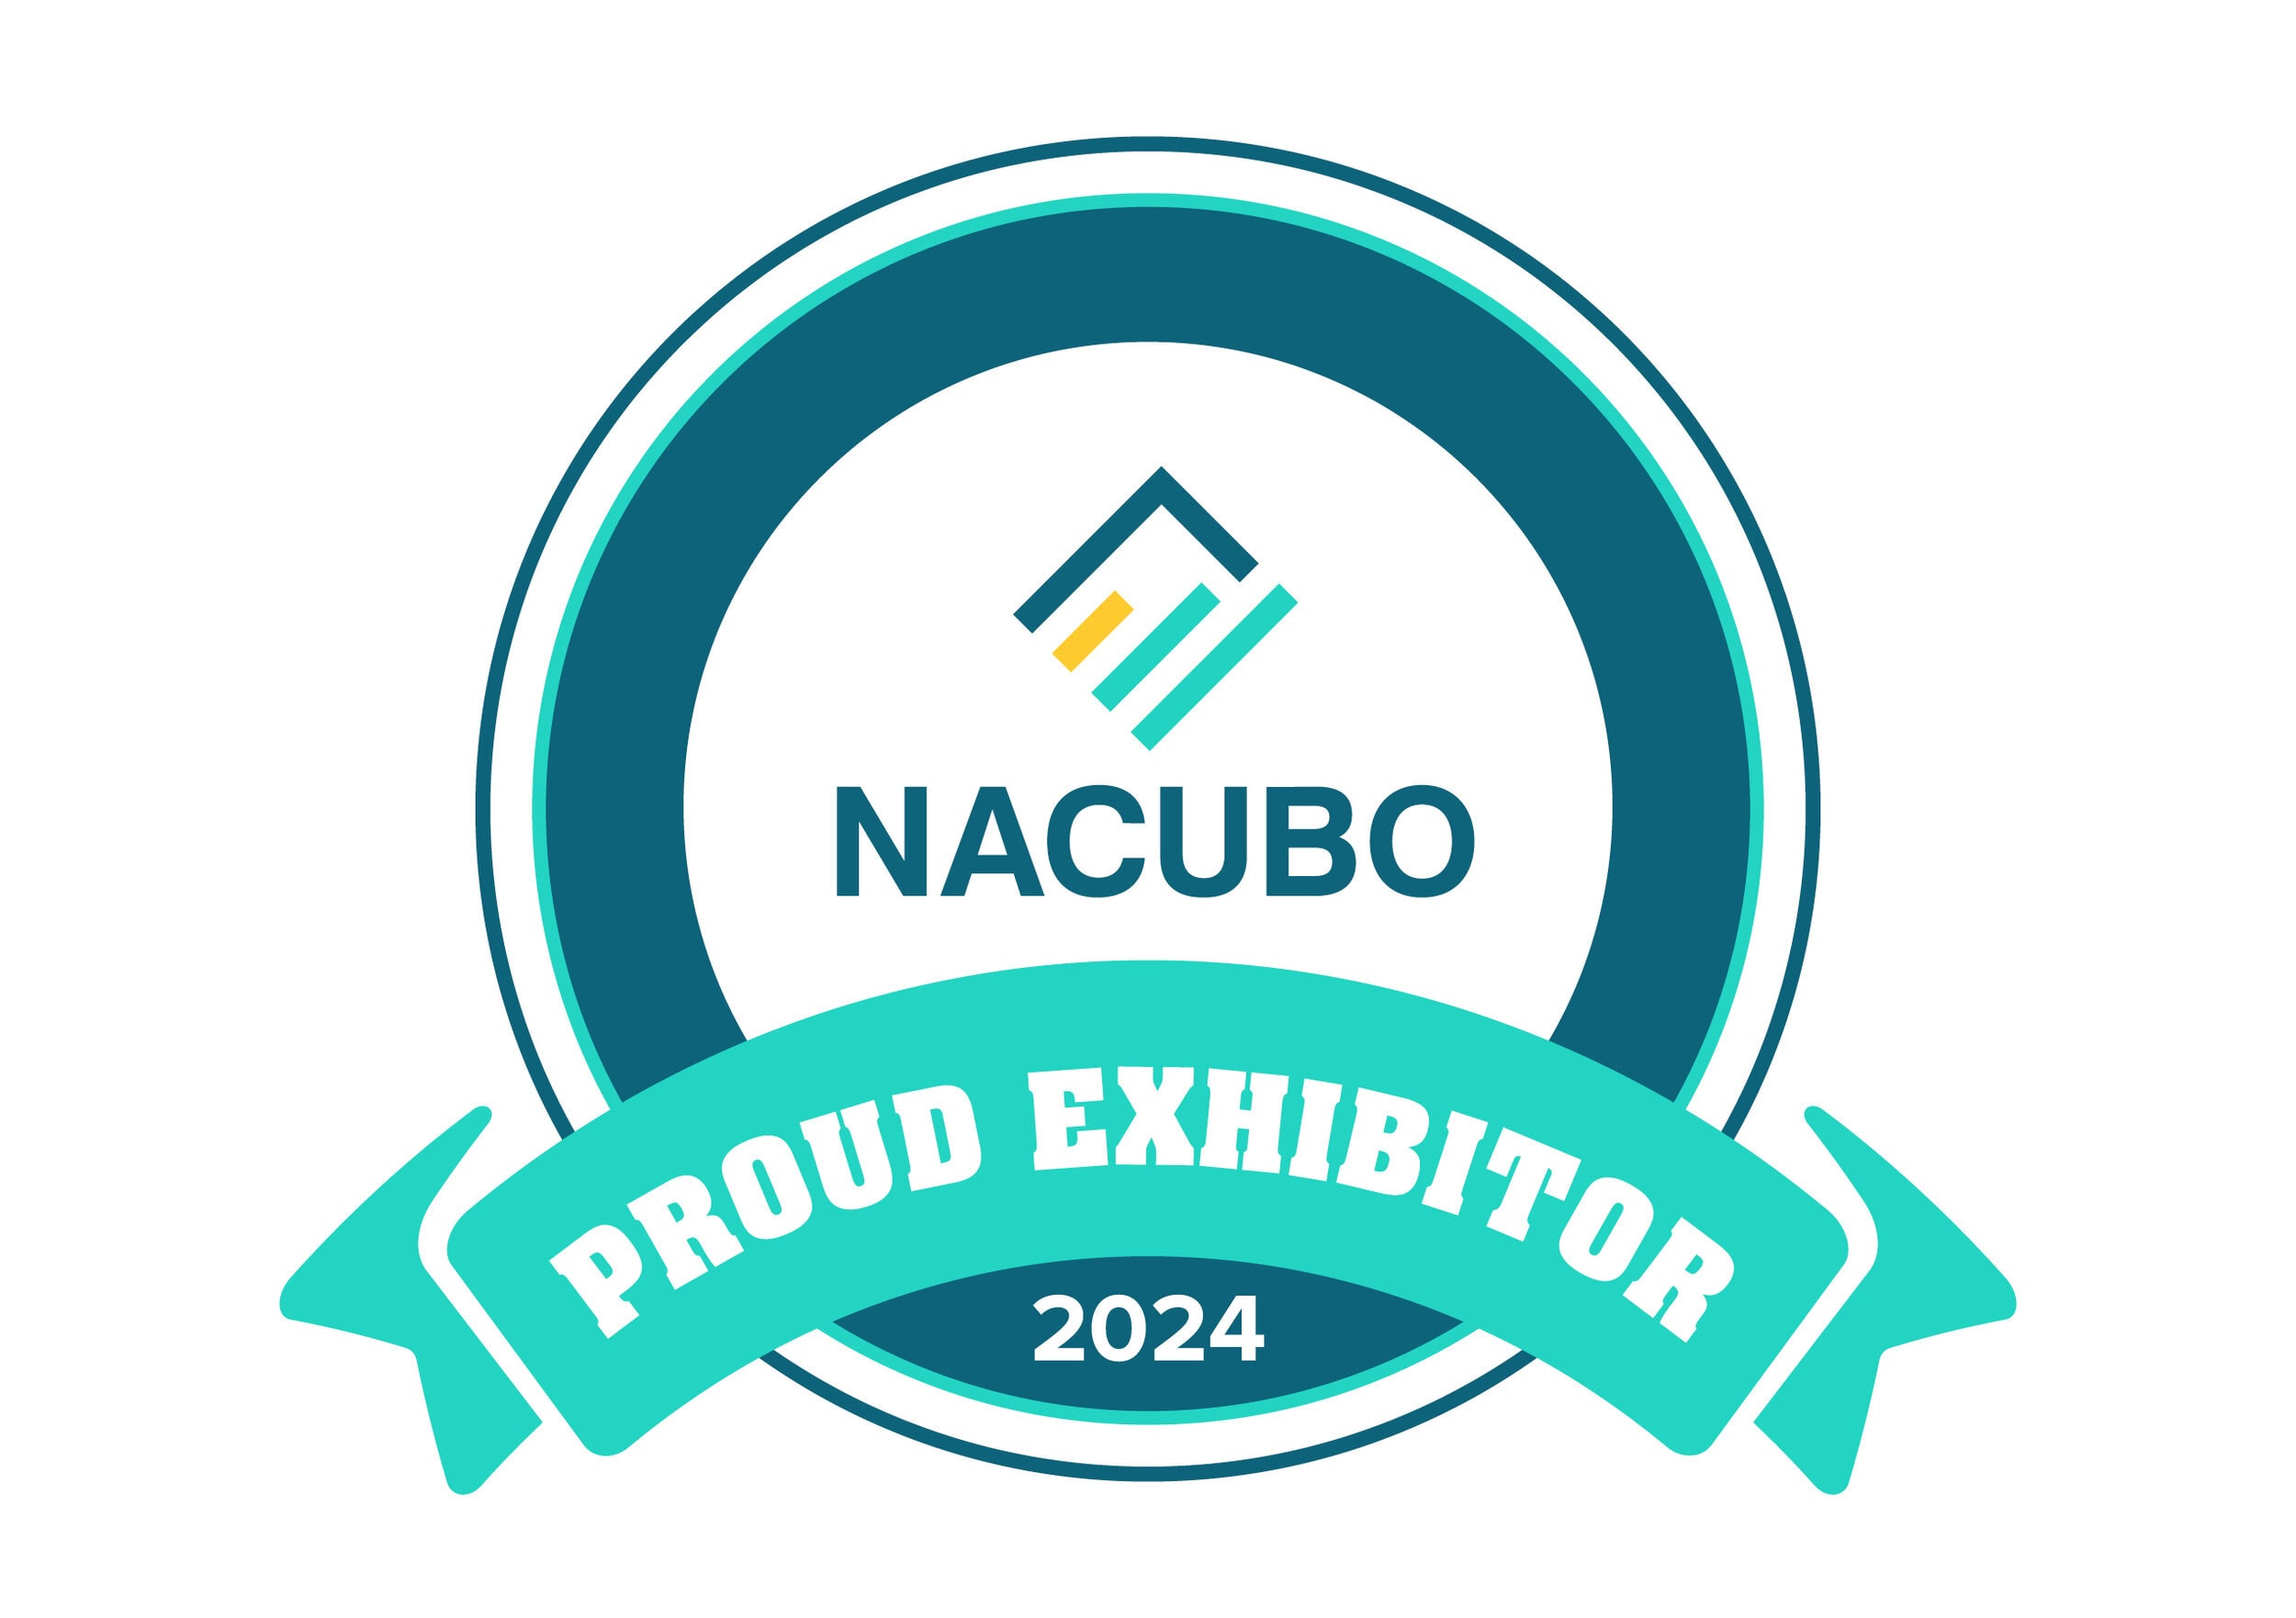 Visit Us at the NACUBO 2024 Annual Meeting